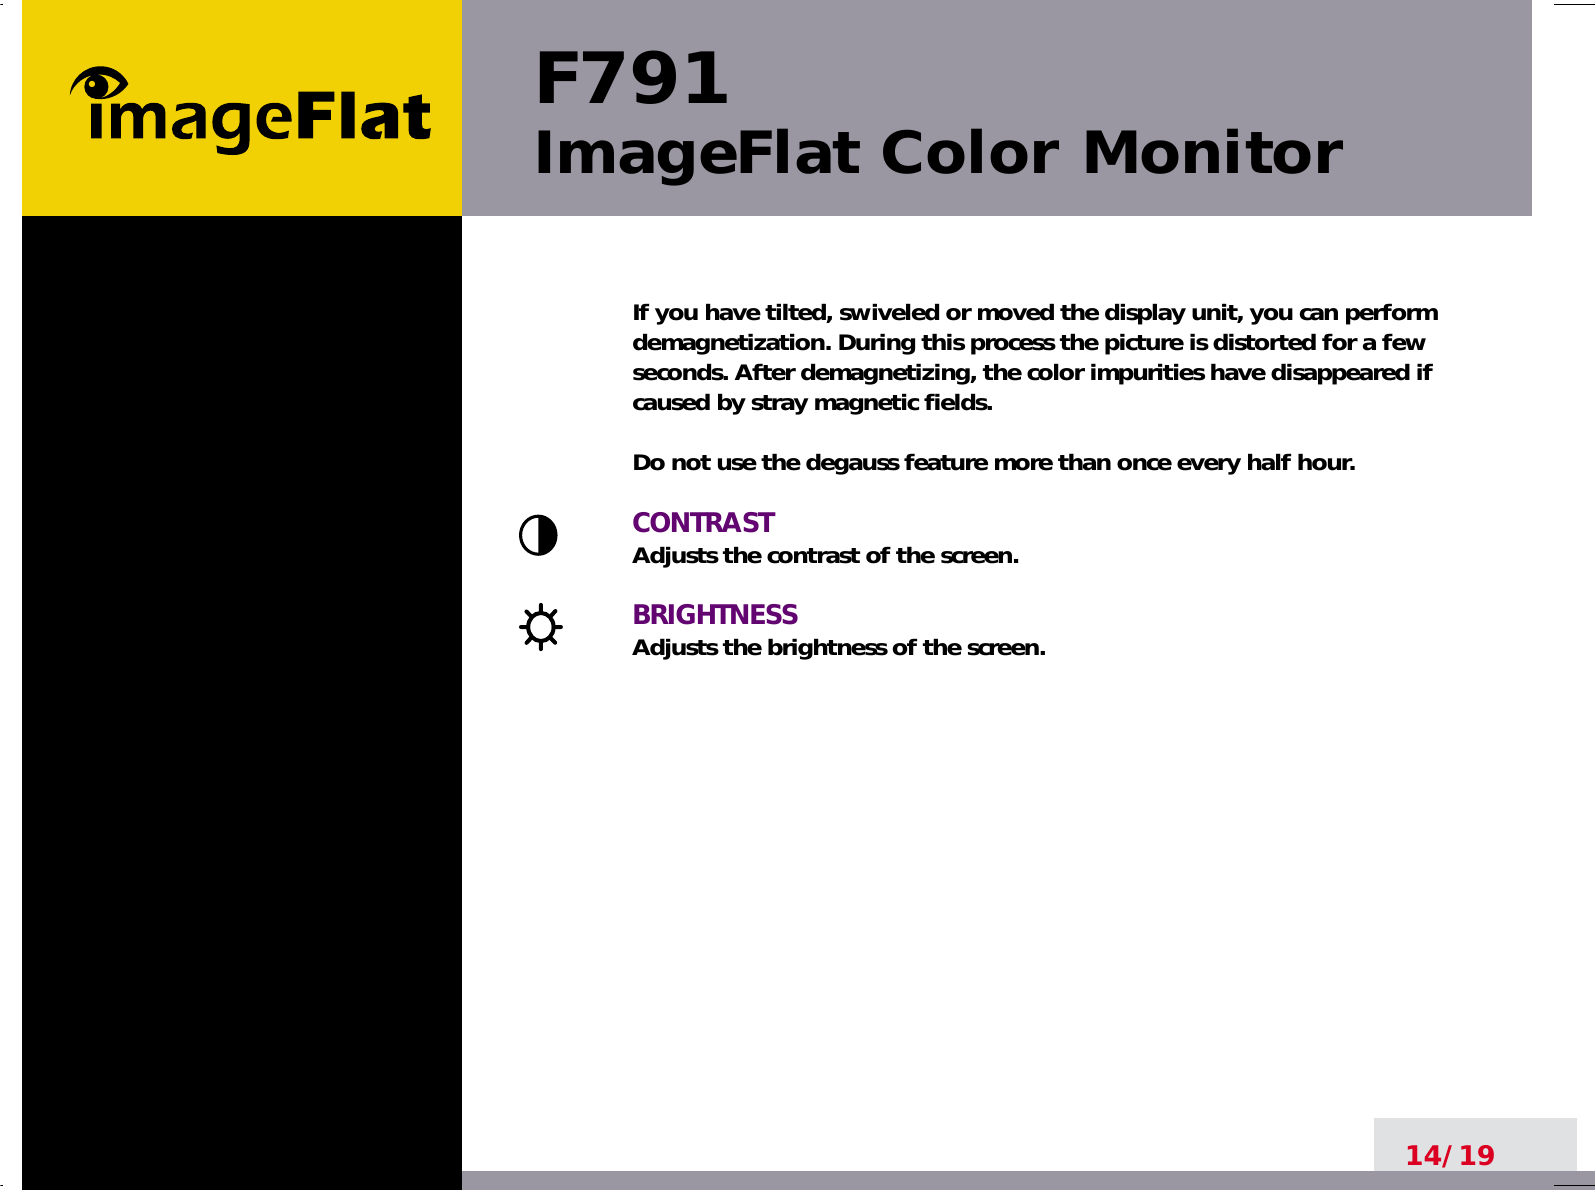 F791ImageFlat Color Monitor14/19If you have tilted, swiveled or moved the display unit, you can performdemagnetization. During this process the picture is distorted for a fewseconds. After demagnetizing, the color impurities have disappeared ifcaused by stray magnetic fields. Do not use the degauss feature more than once every half hour.CONTRASTAdjusts the contrast of the screen.BRIGHTNESSAdjusts the brightness of the screen.